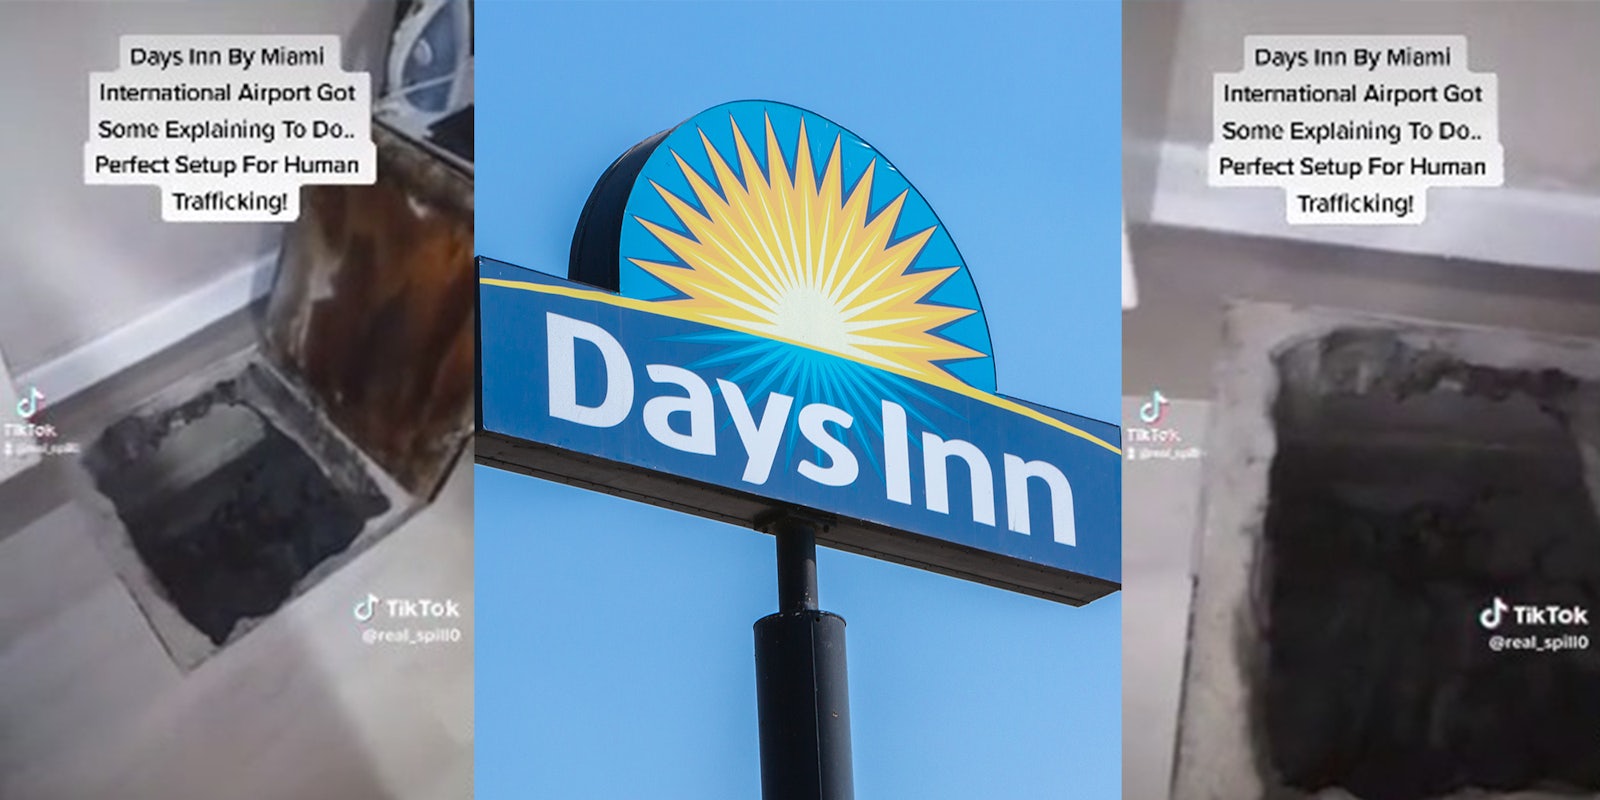 Days Inn guest says hotel is 'perfect' for human trafficking after discovering hidden crawlspace